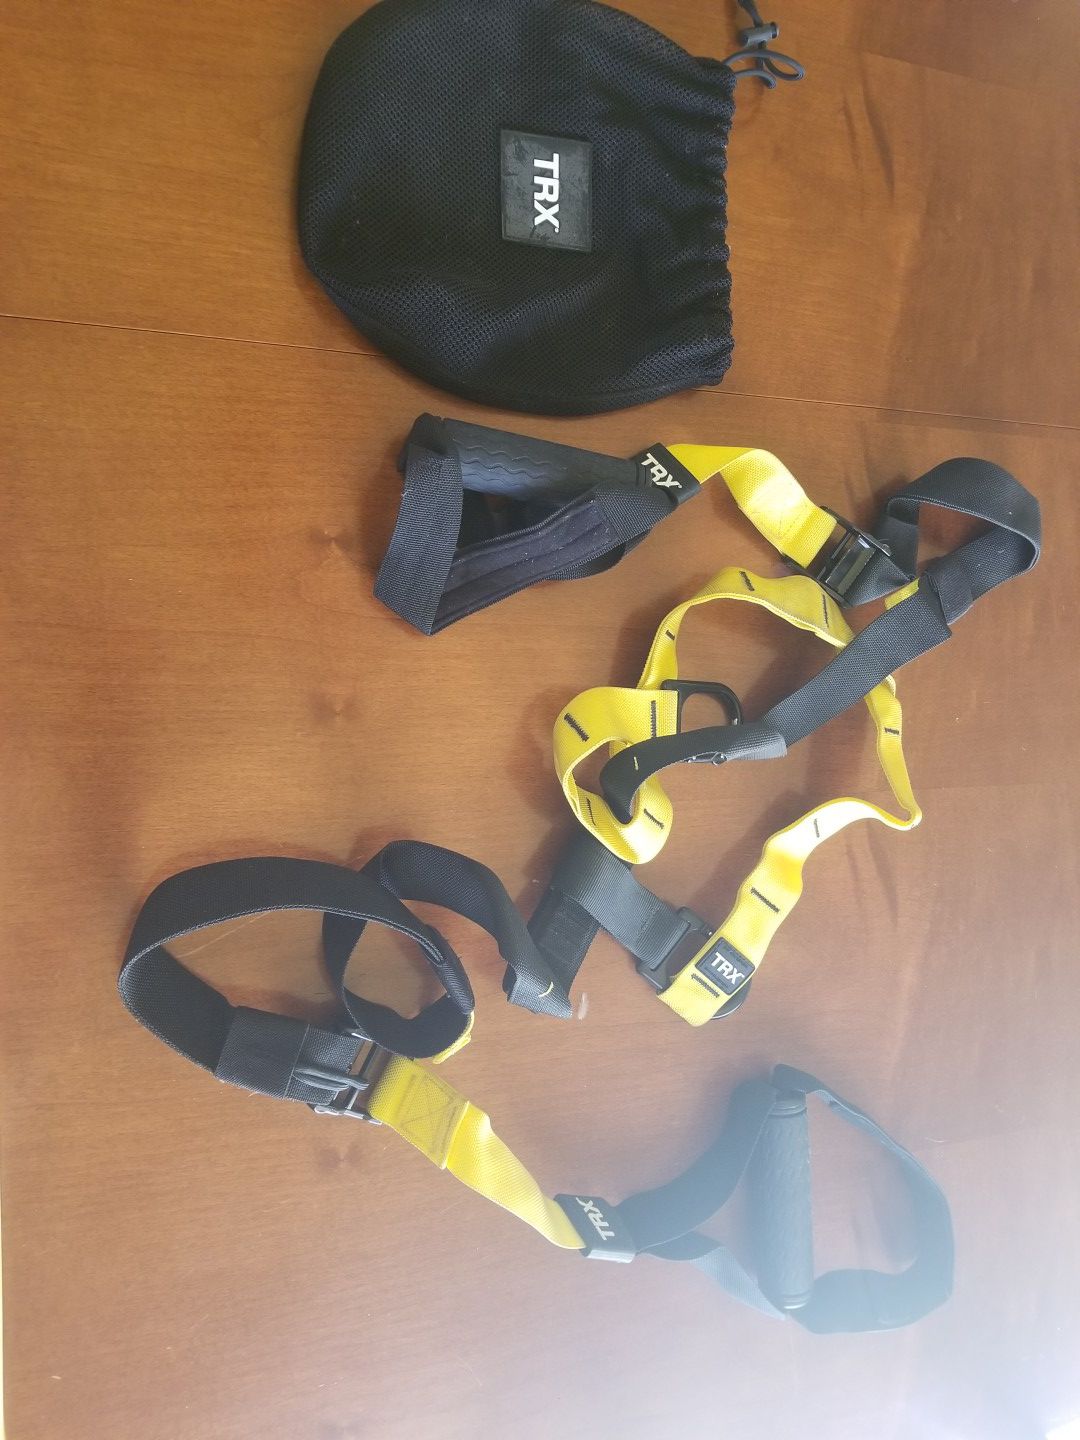 Trx Like NEW Used Only a few times